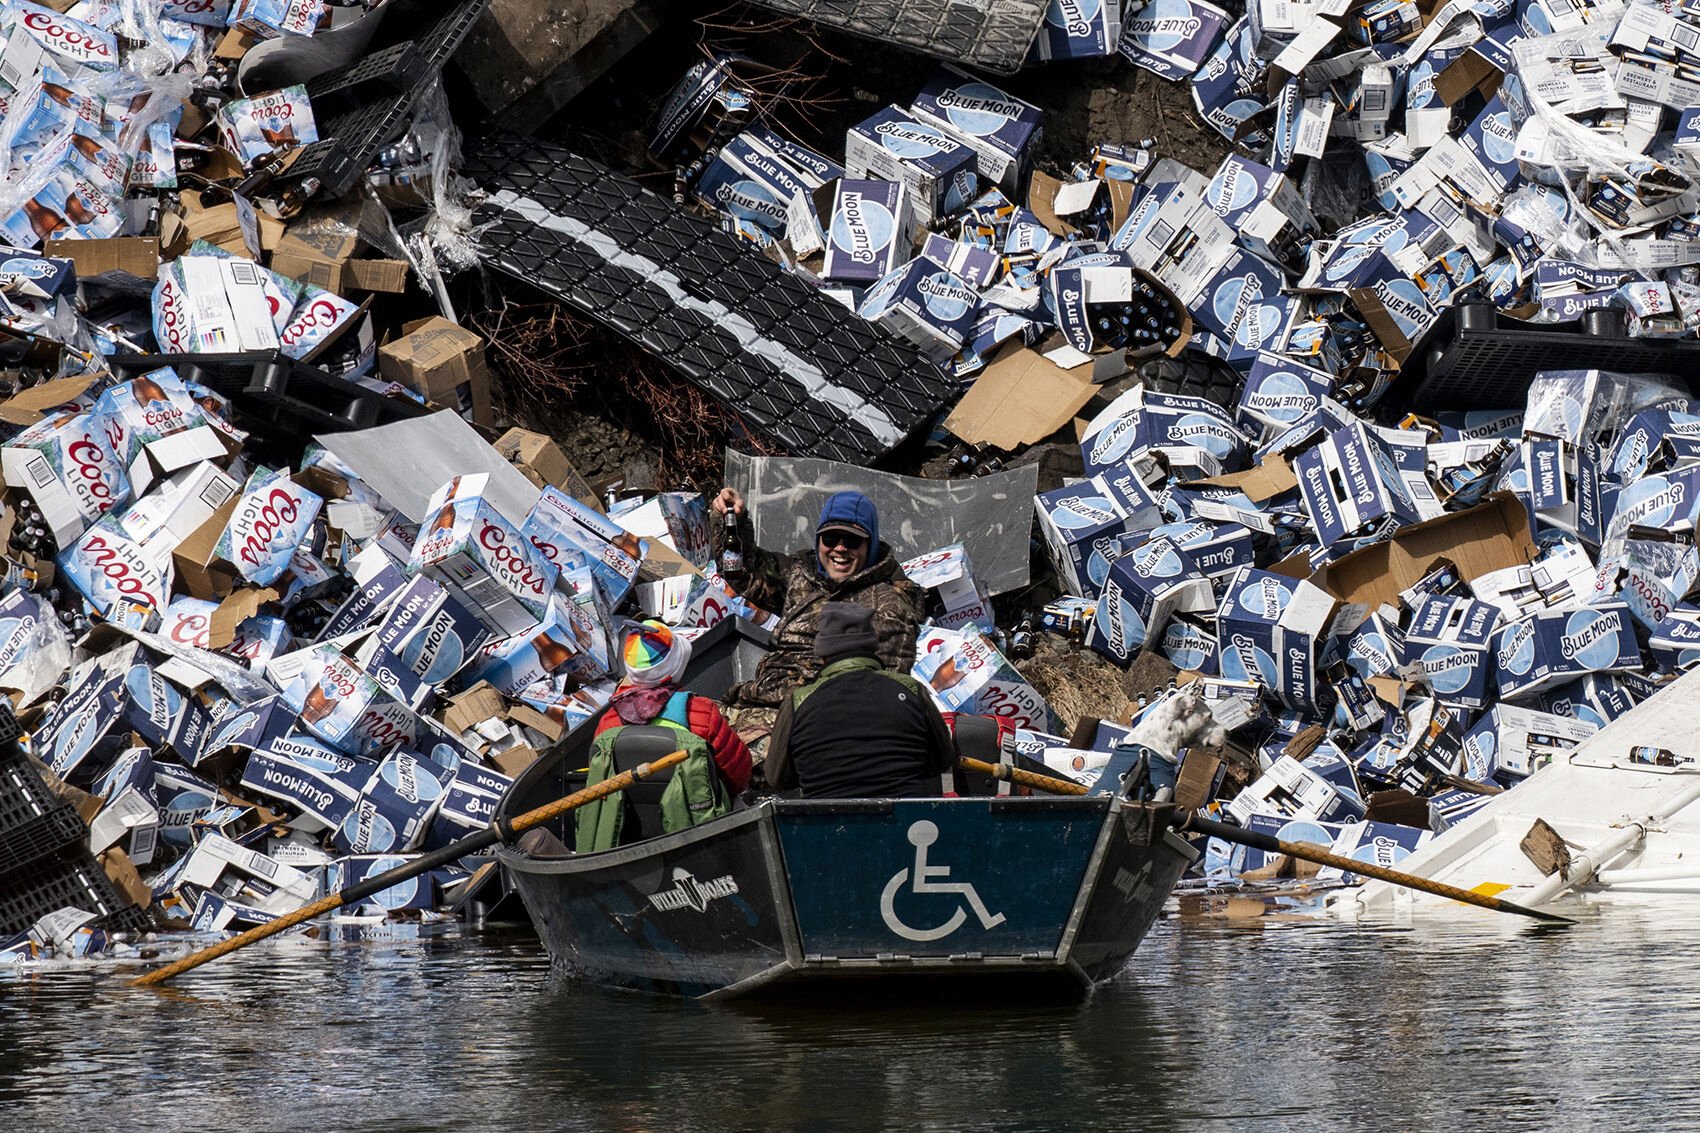  Stephen Smith lifts a bottle of Coors Light from the banks of the Clark Fork River following a train derailment near Quinn's Hot Springs near Plains, Montana, on April 2, 2023. At least 20 cars of a westbound freight train derailed, some containing 